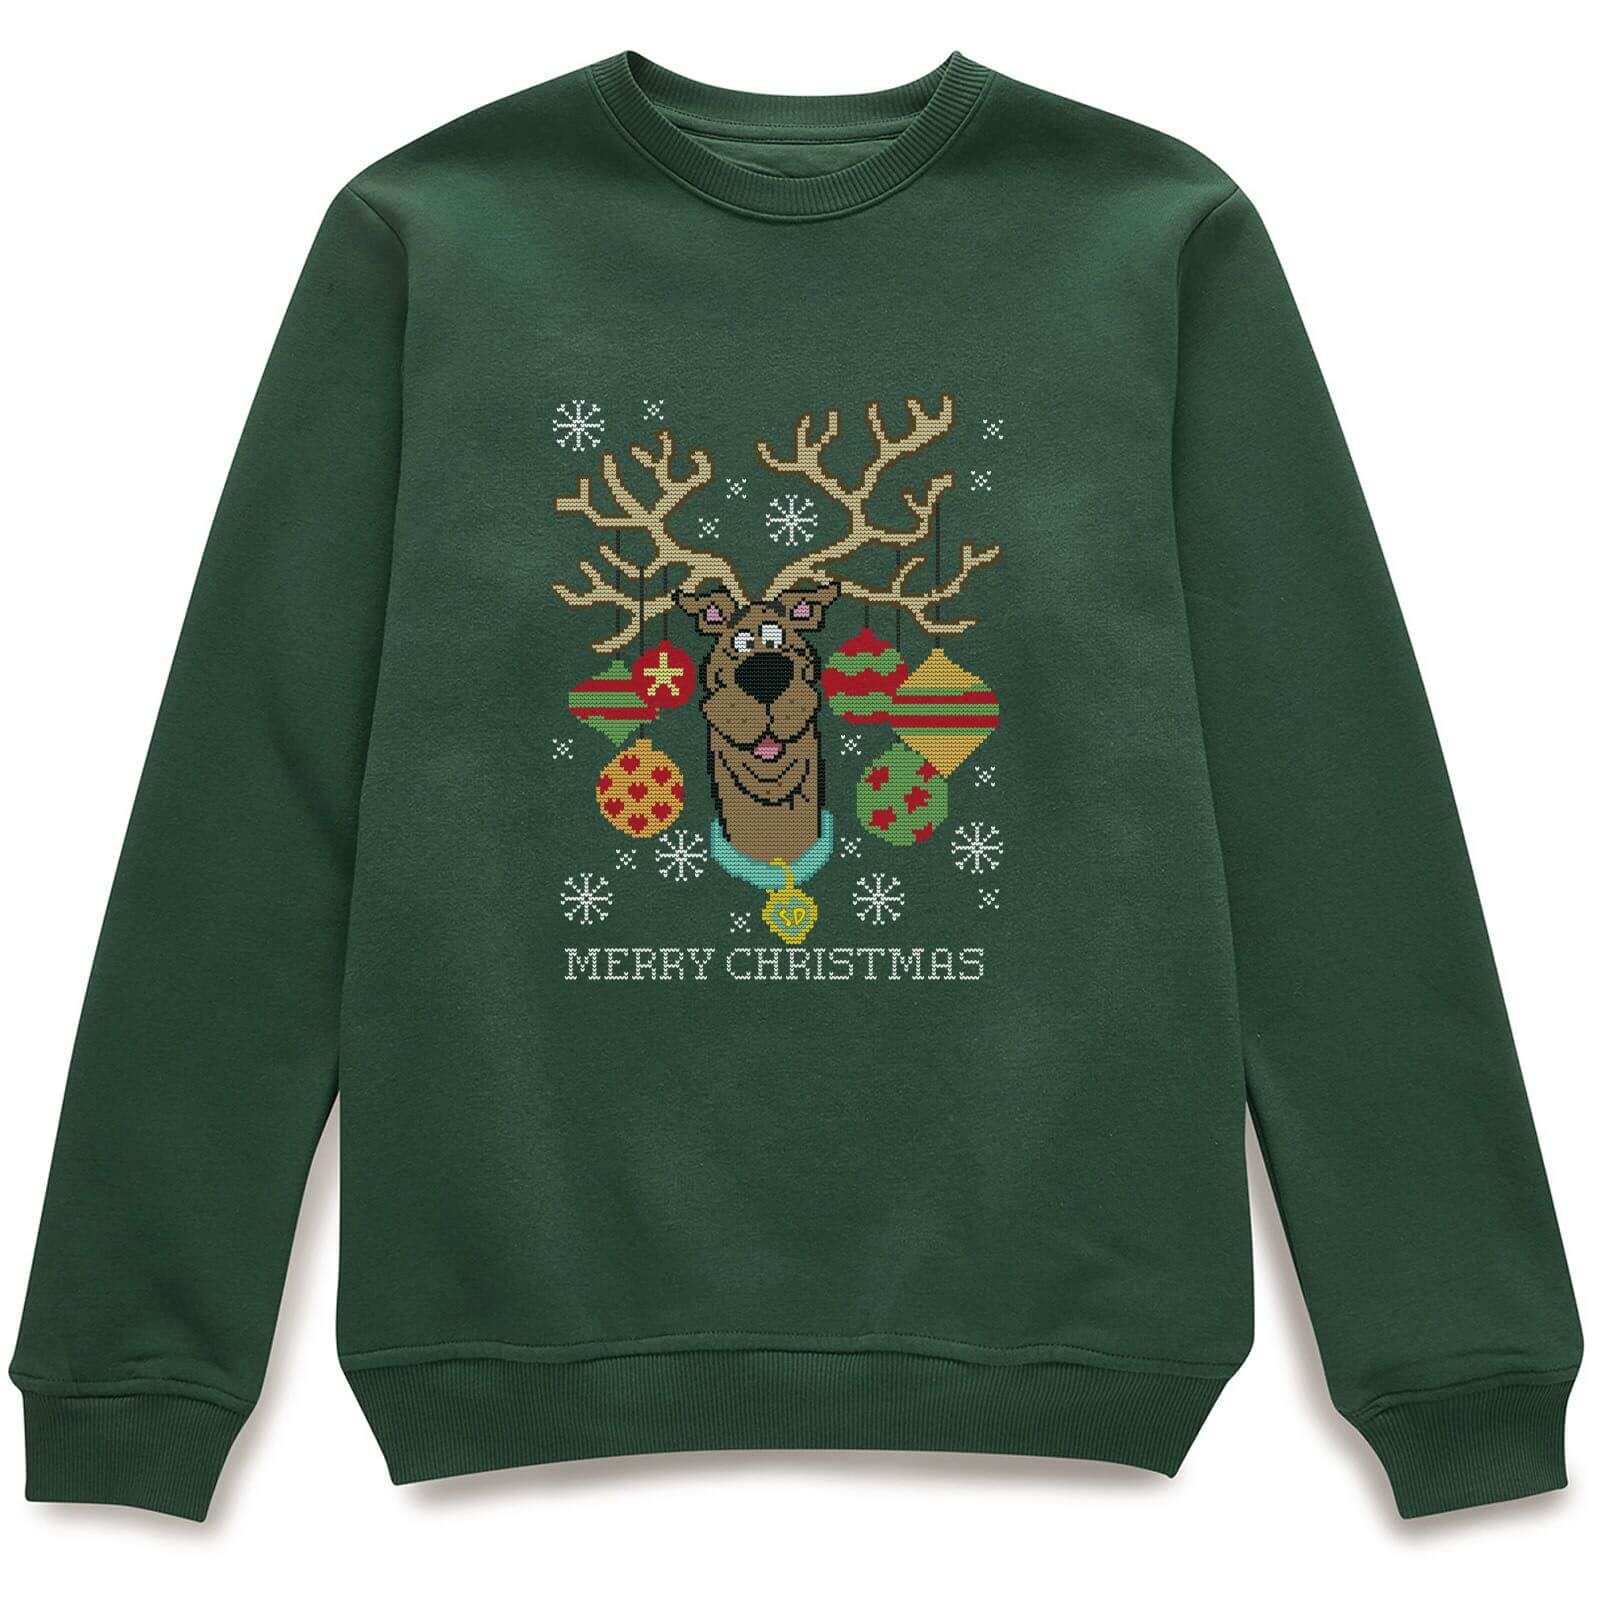 Scooby Doo Christmas Jumper - Forest Green - S